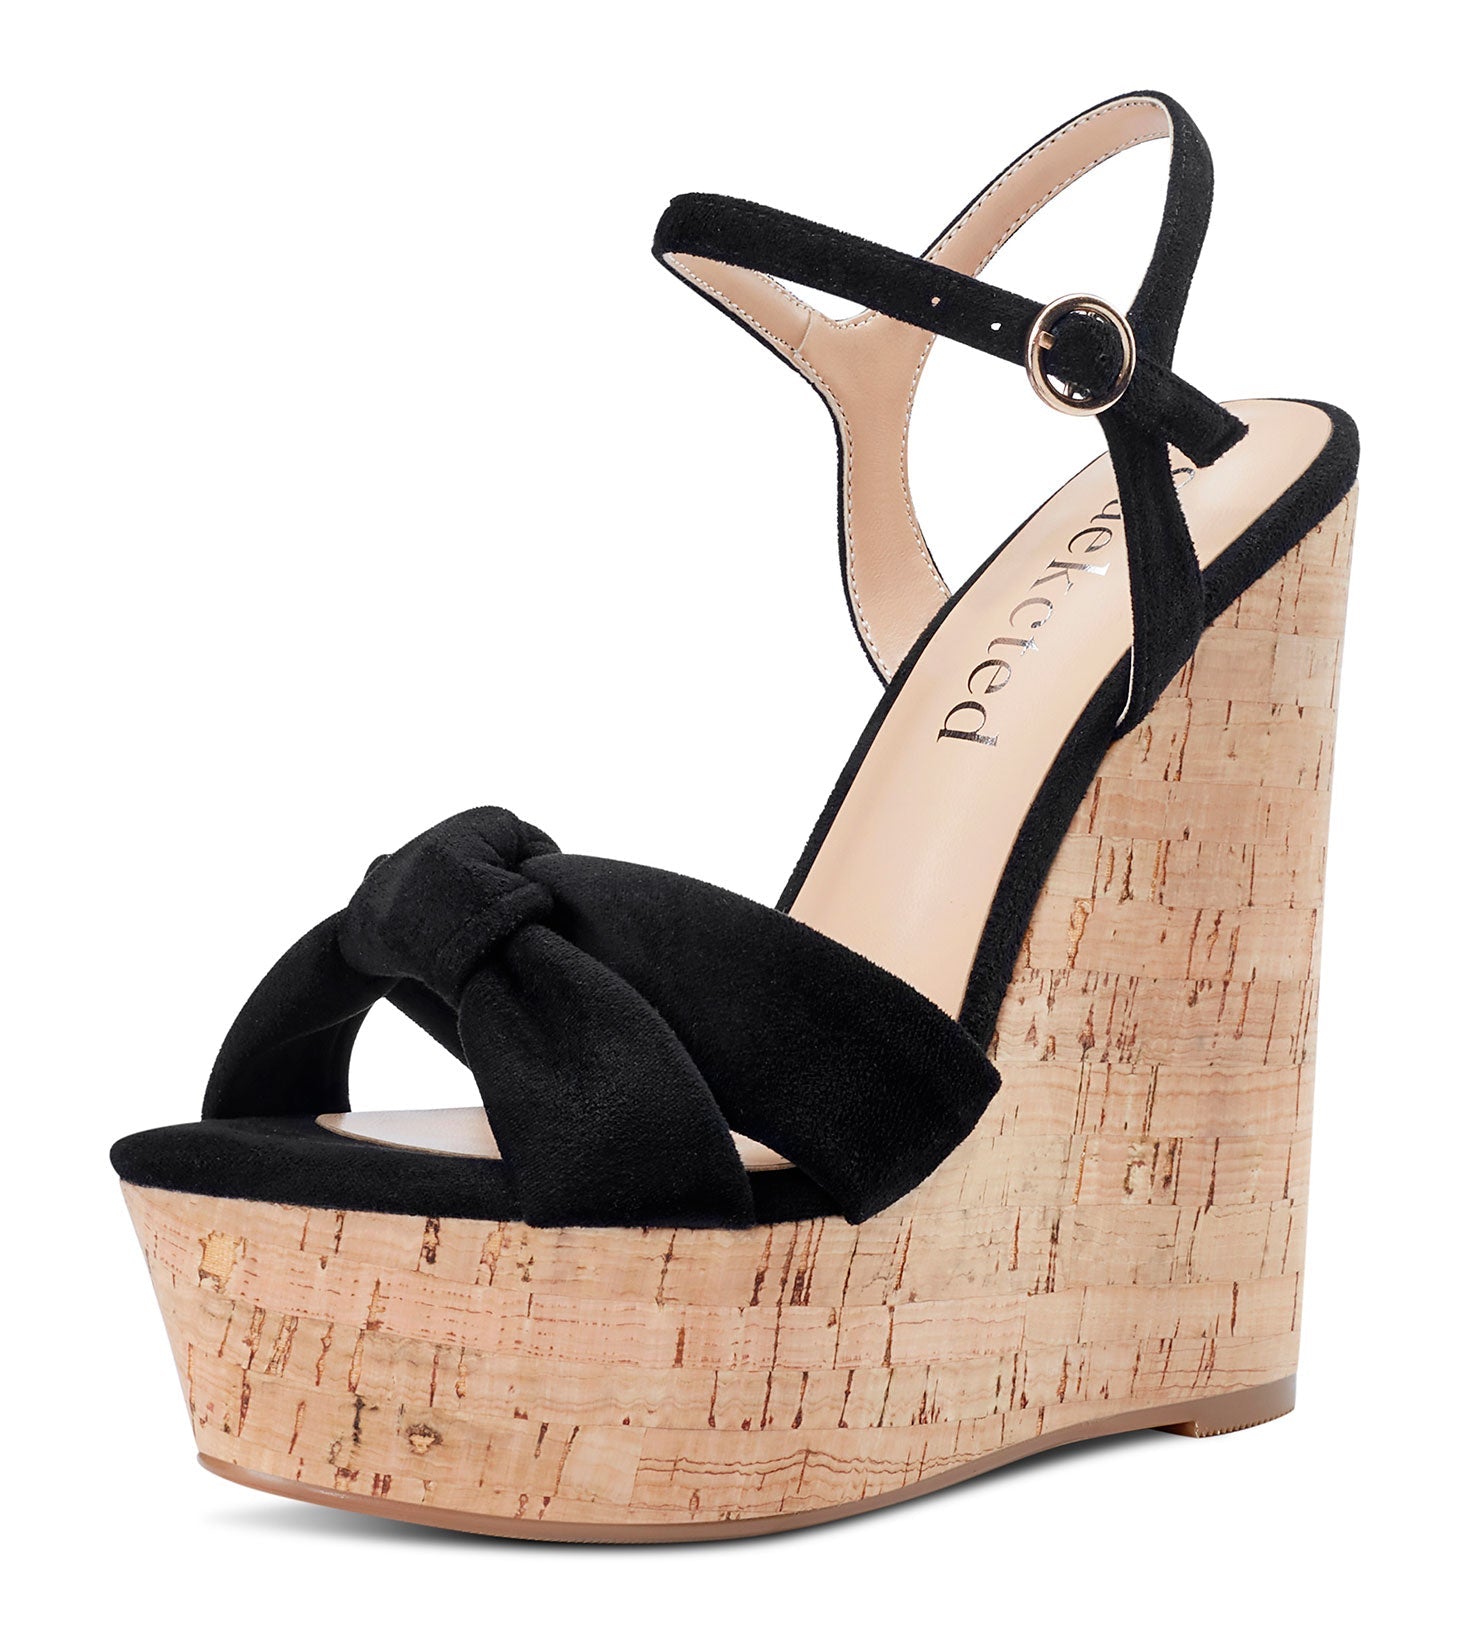 Buy Pink Women's Wedges - The Chios Pink | Tresmode